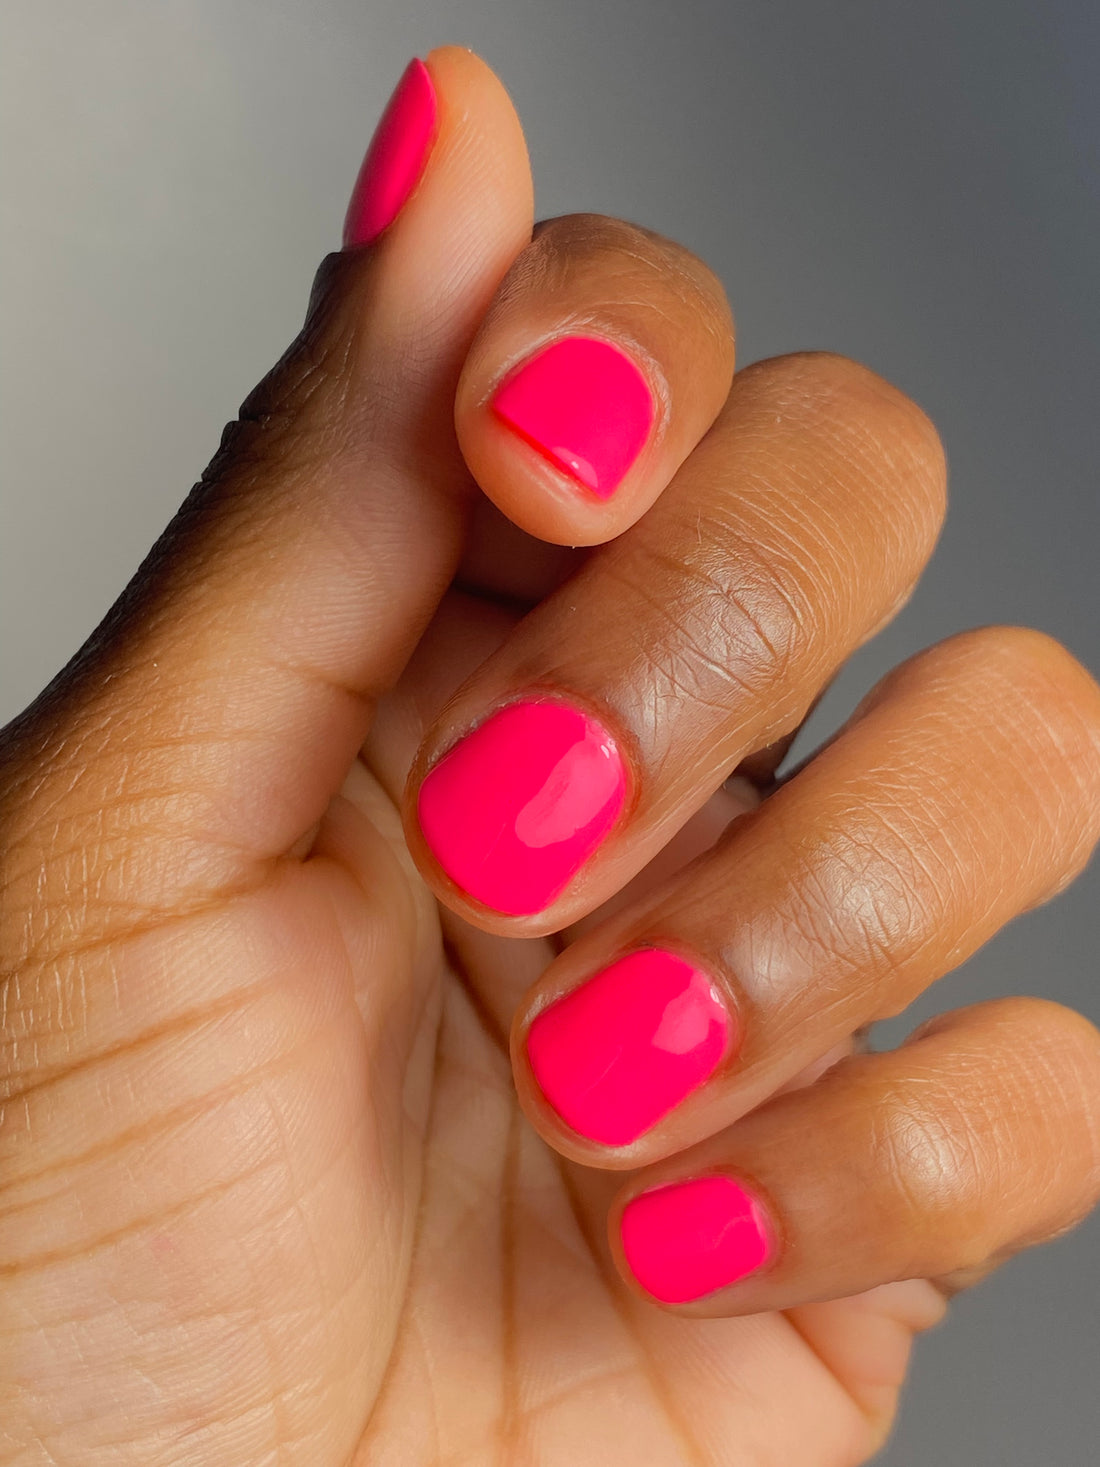 How To: Achieve The Perfect Manicure